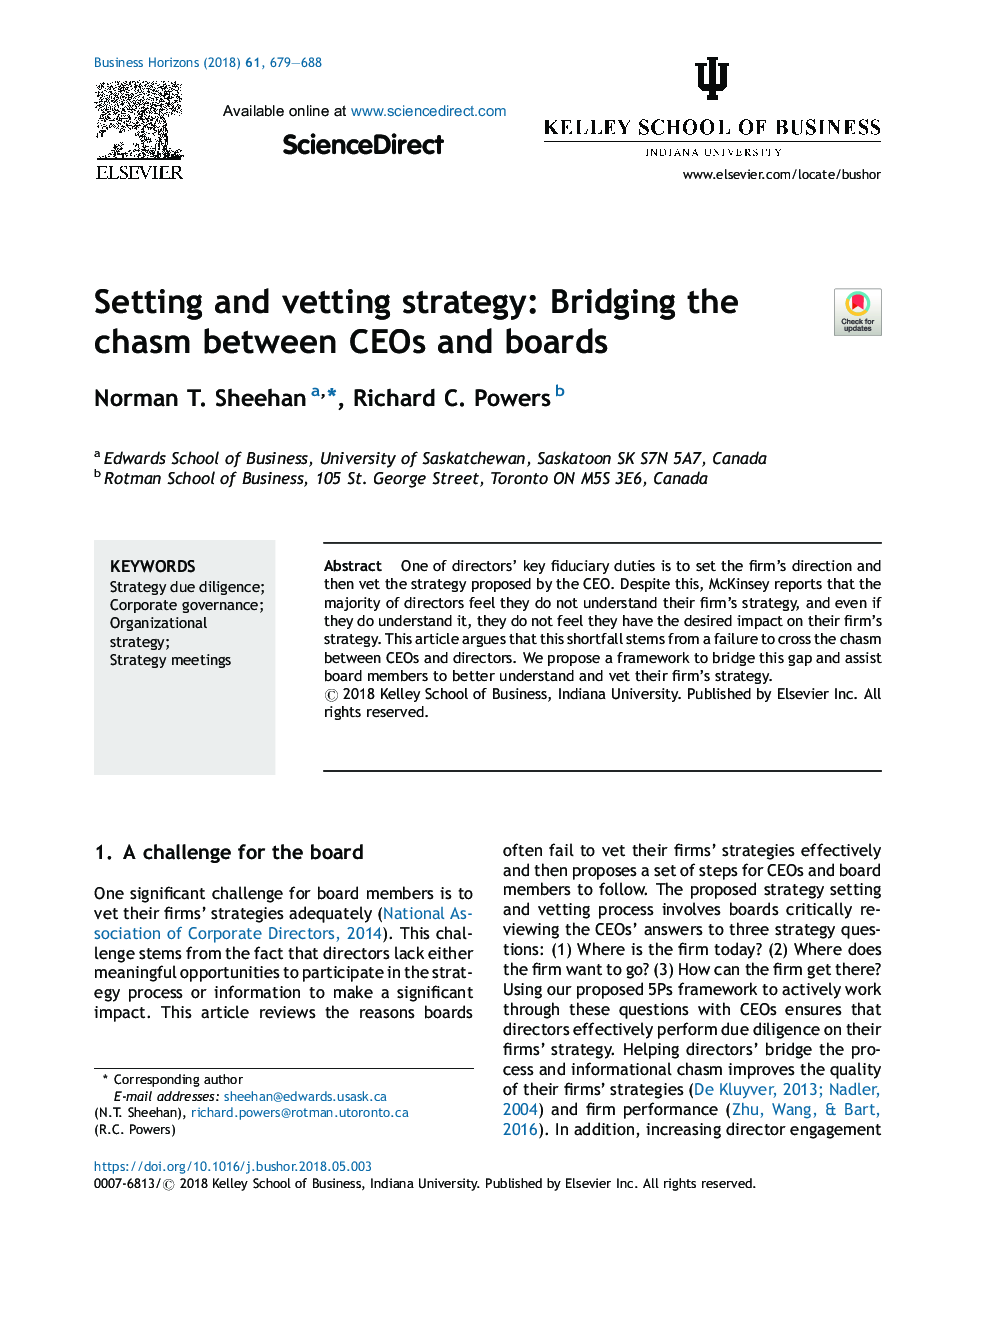 Setting and vetting strategy: Bridging the chasm between CEOs and boards